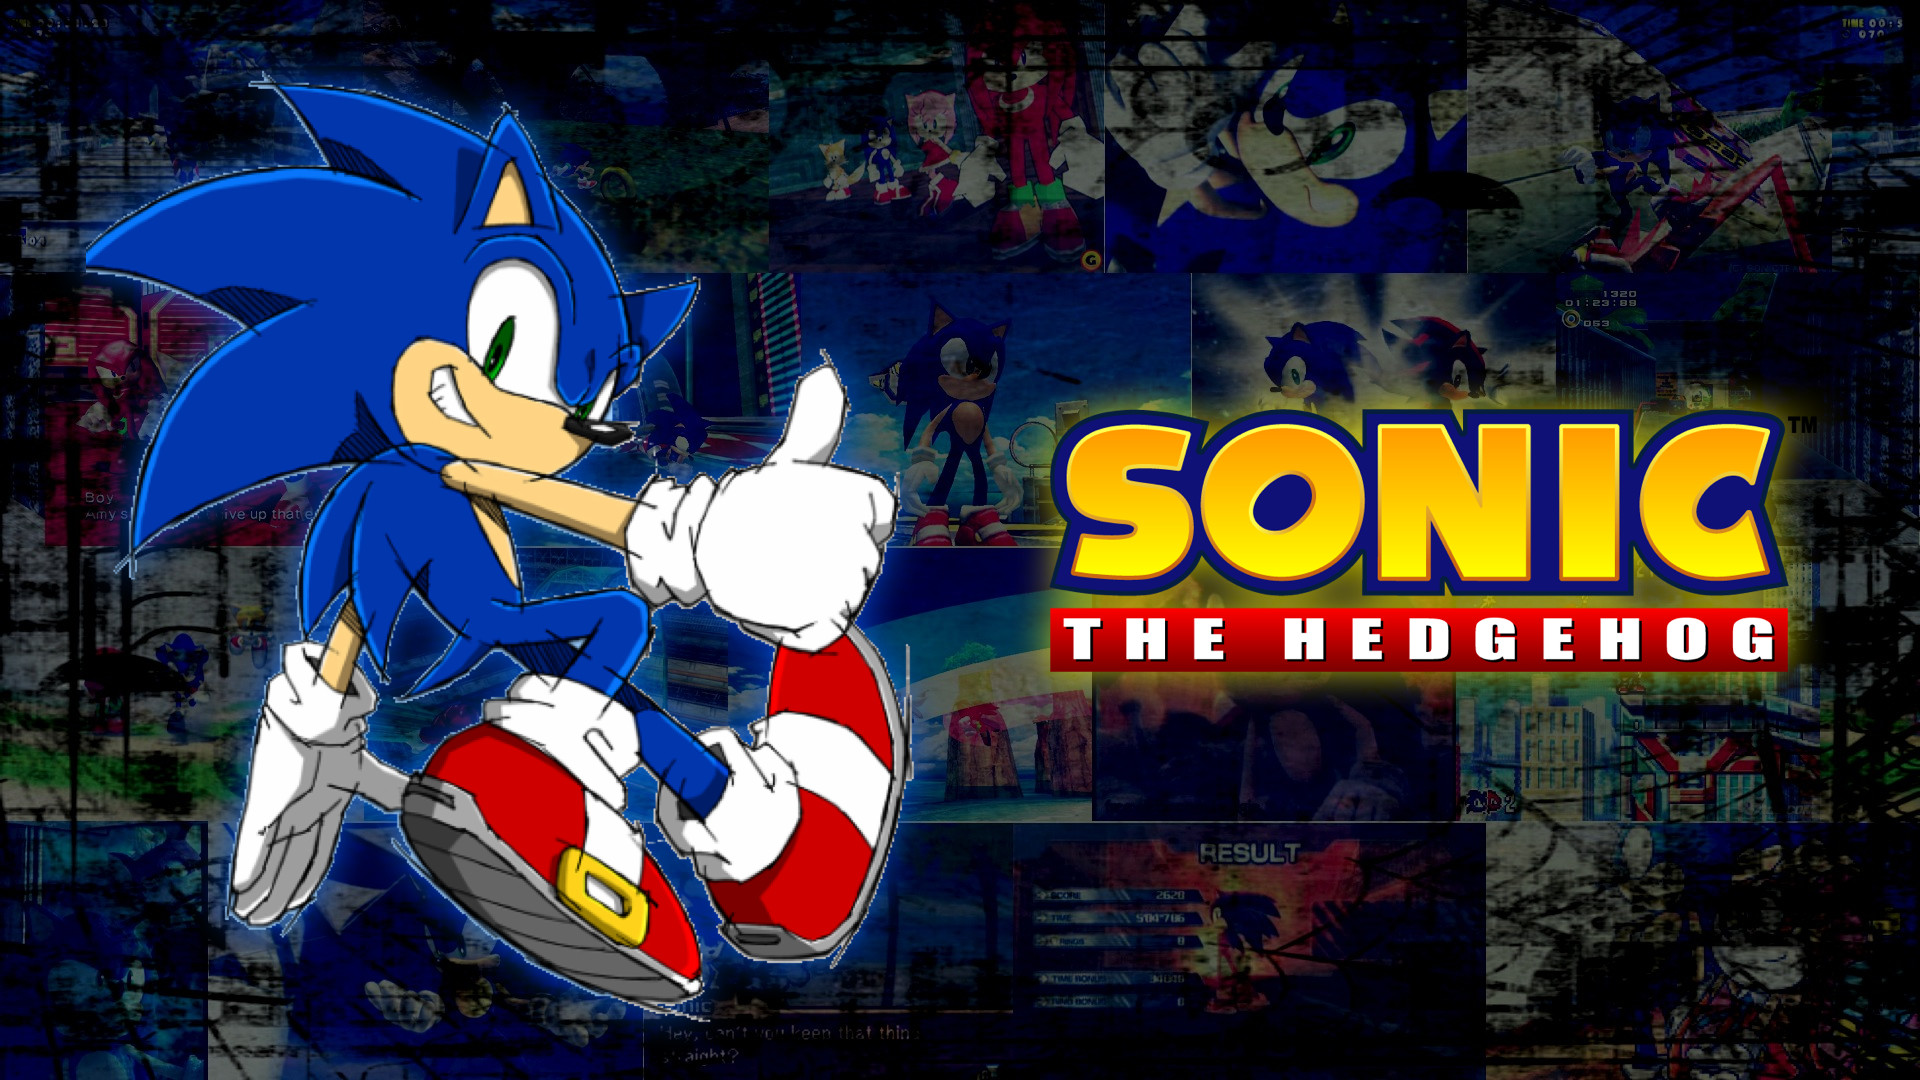 1920x1080 Sonic | Sonic Images, Pictures, Wallpapers on NMgnCP